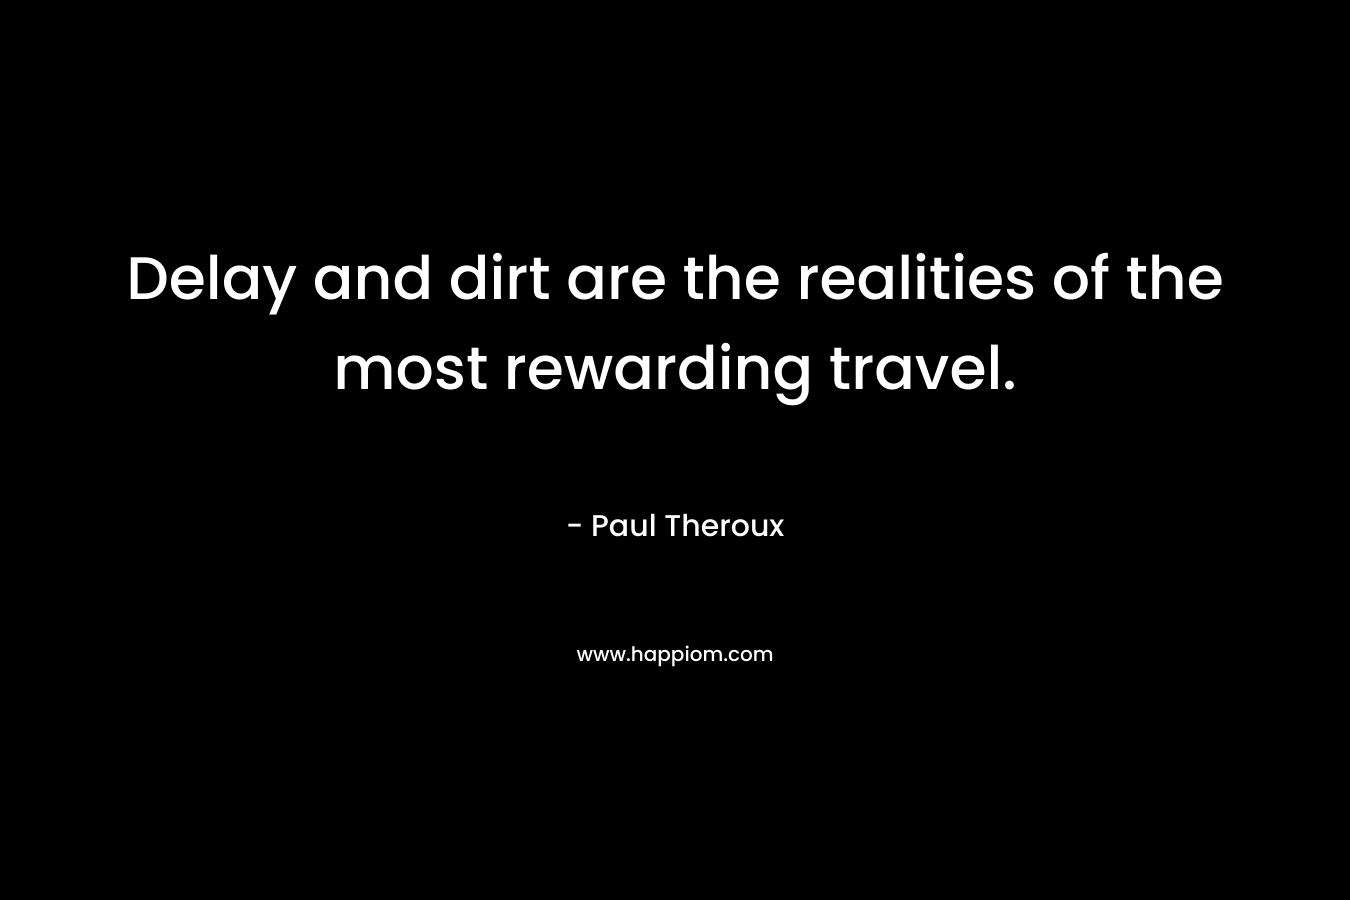 Delay and dirt are the realities of the most rewarding travel.